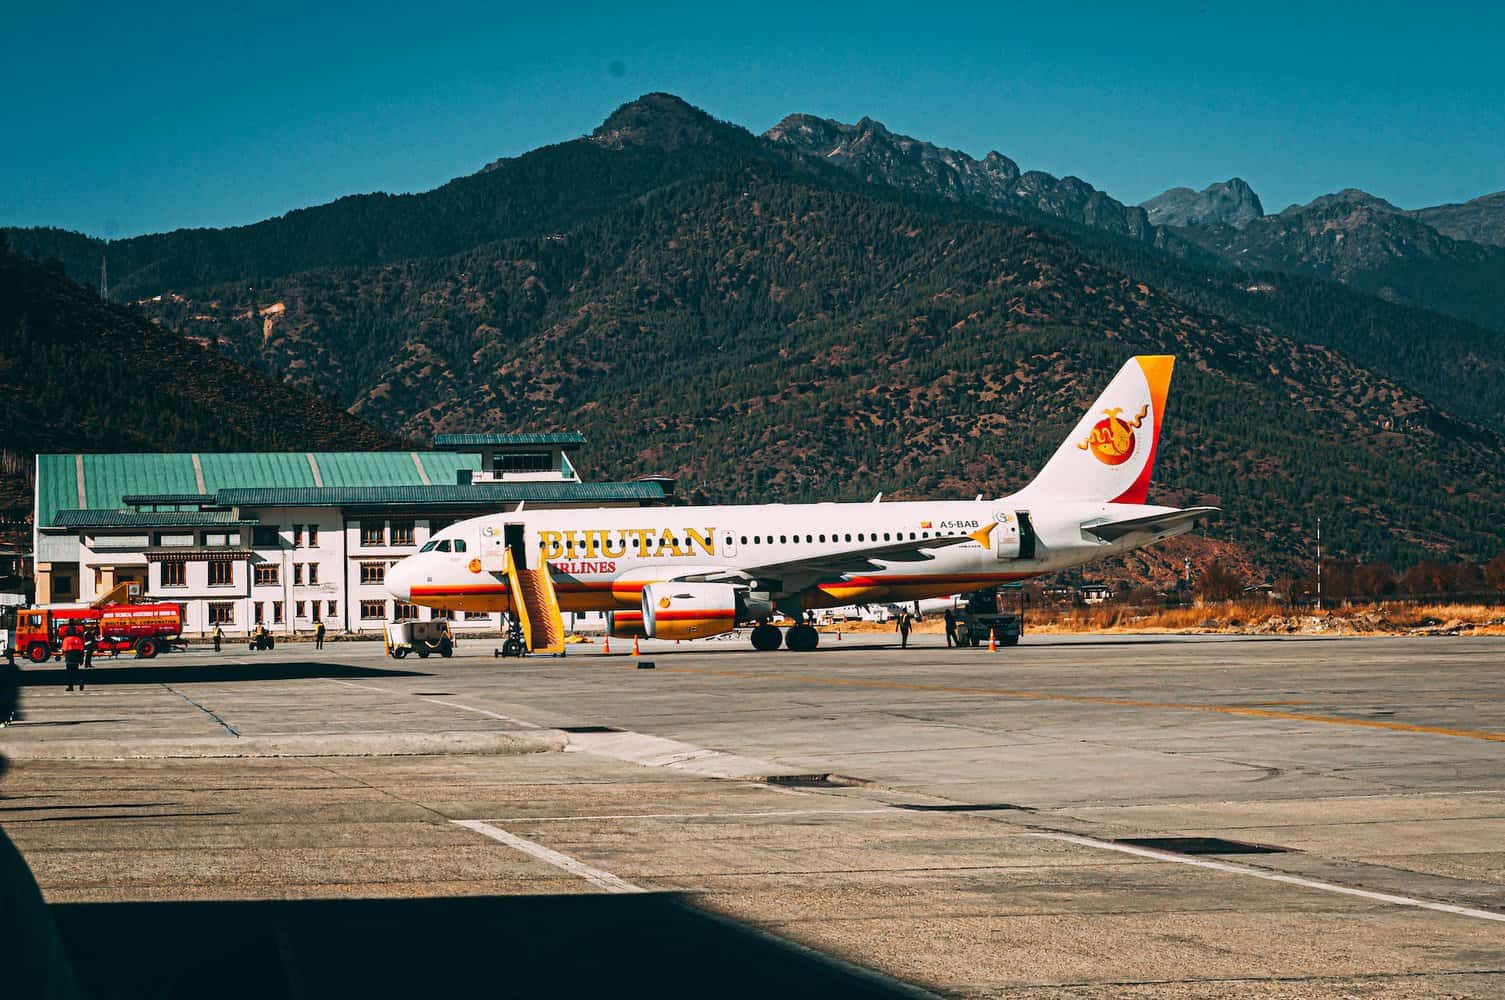 passenger plane on tarmac. Bhutan Airlines. they only allowed tourism in the 70s, so regained thier tradtional culture. could this be why bhutan is the happiest country